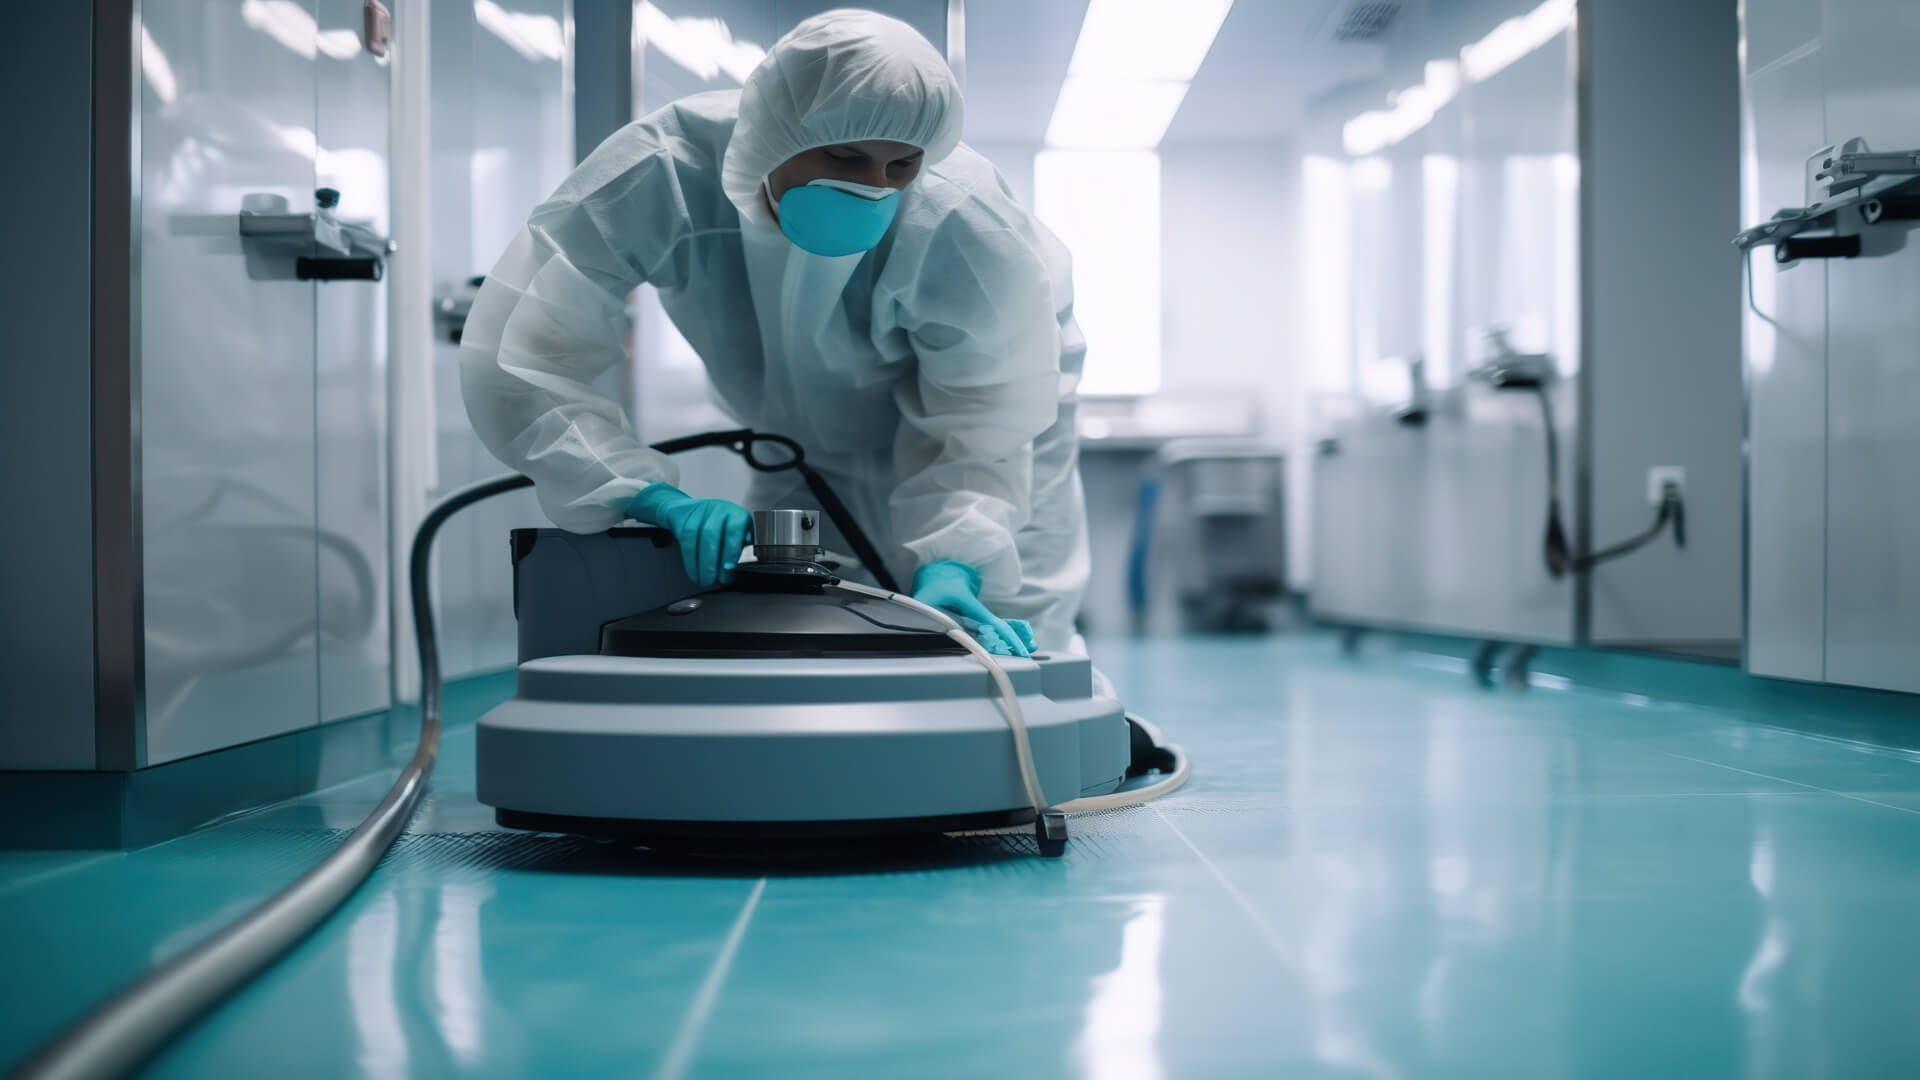 The Power Of Prevention: How Disinfection Practices Shape The Future Of Healthcare